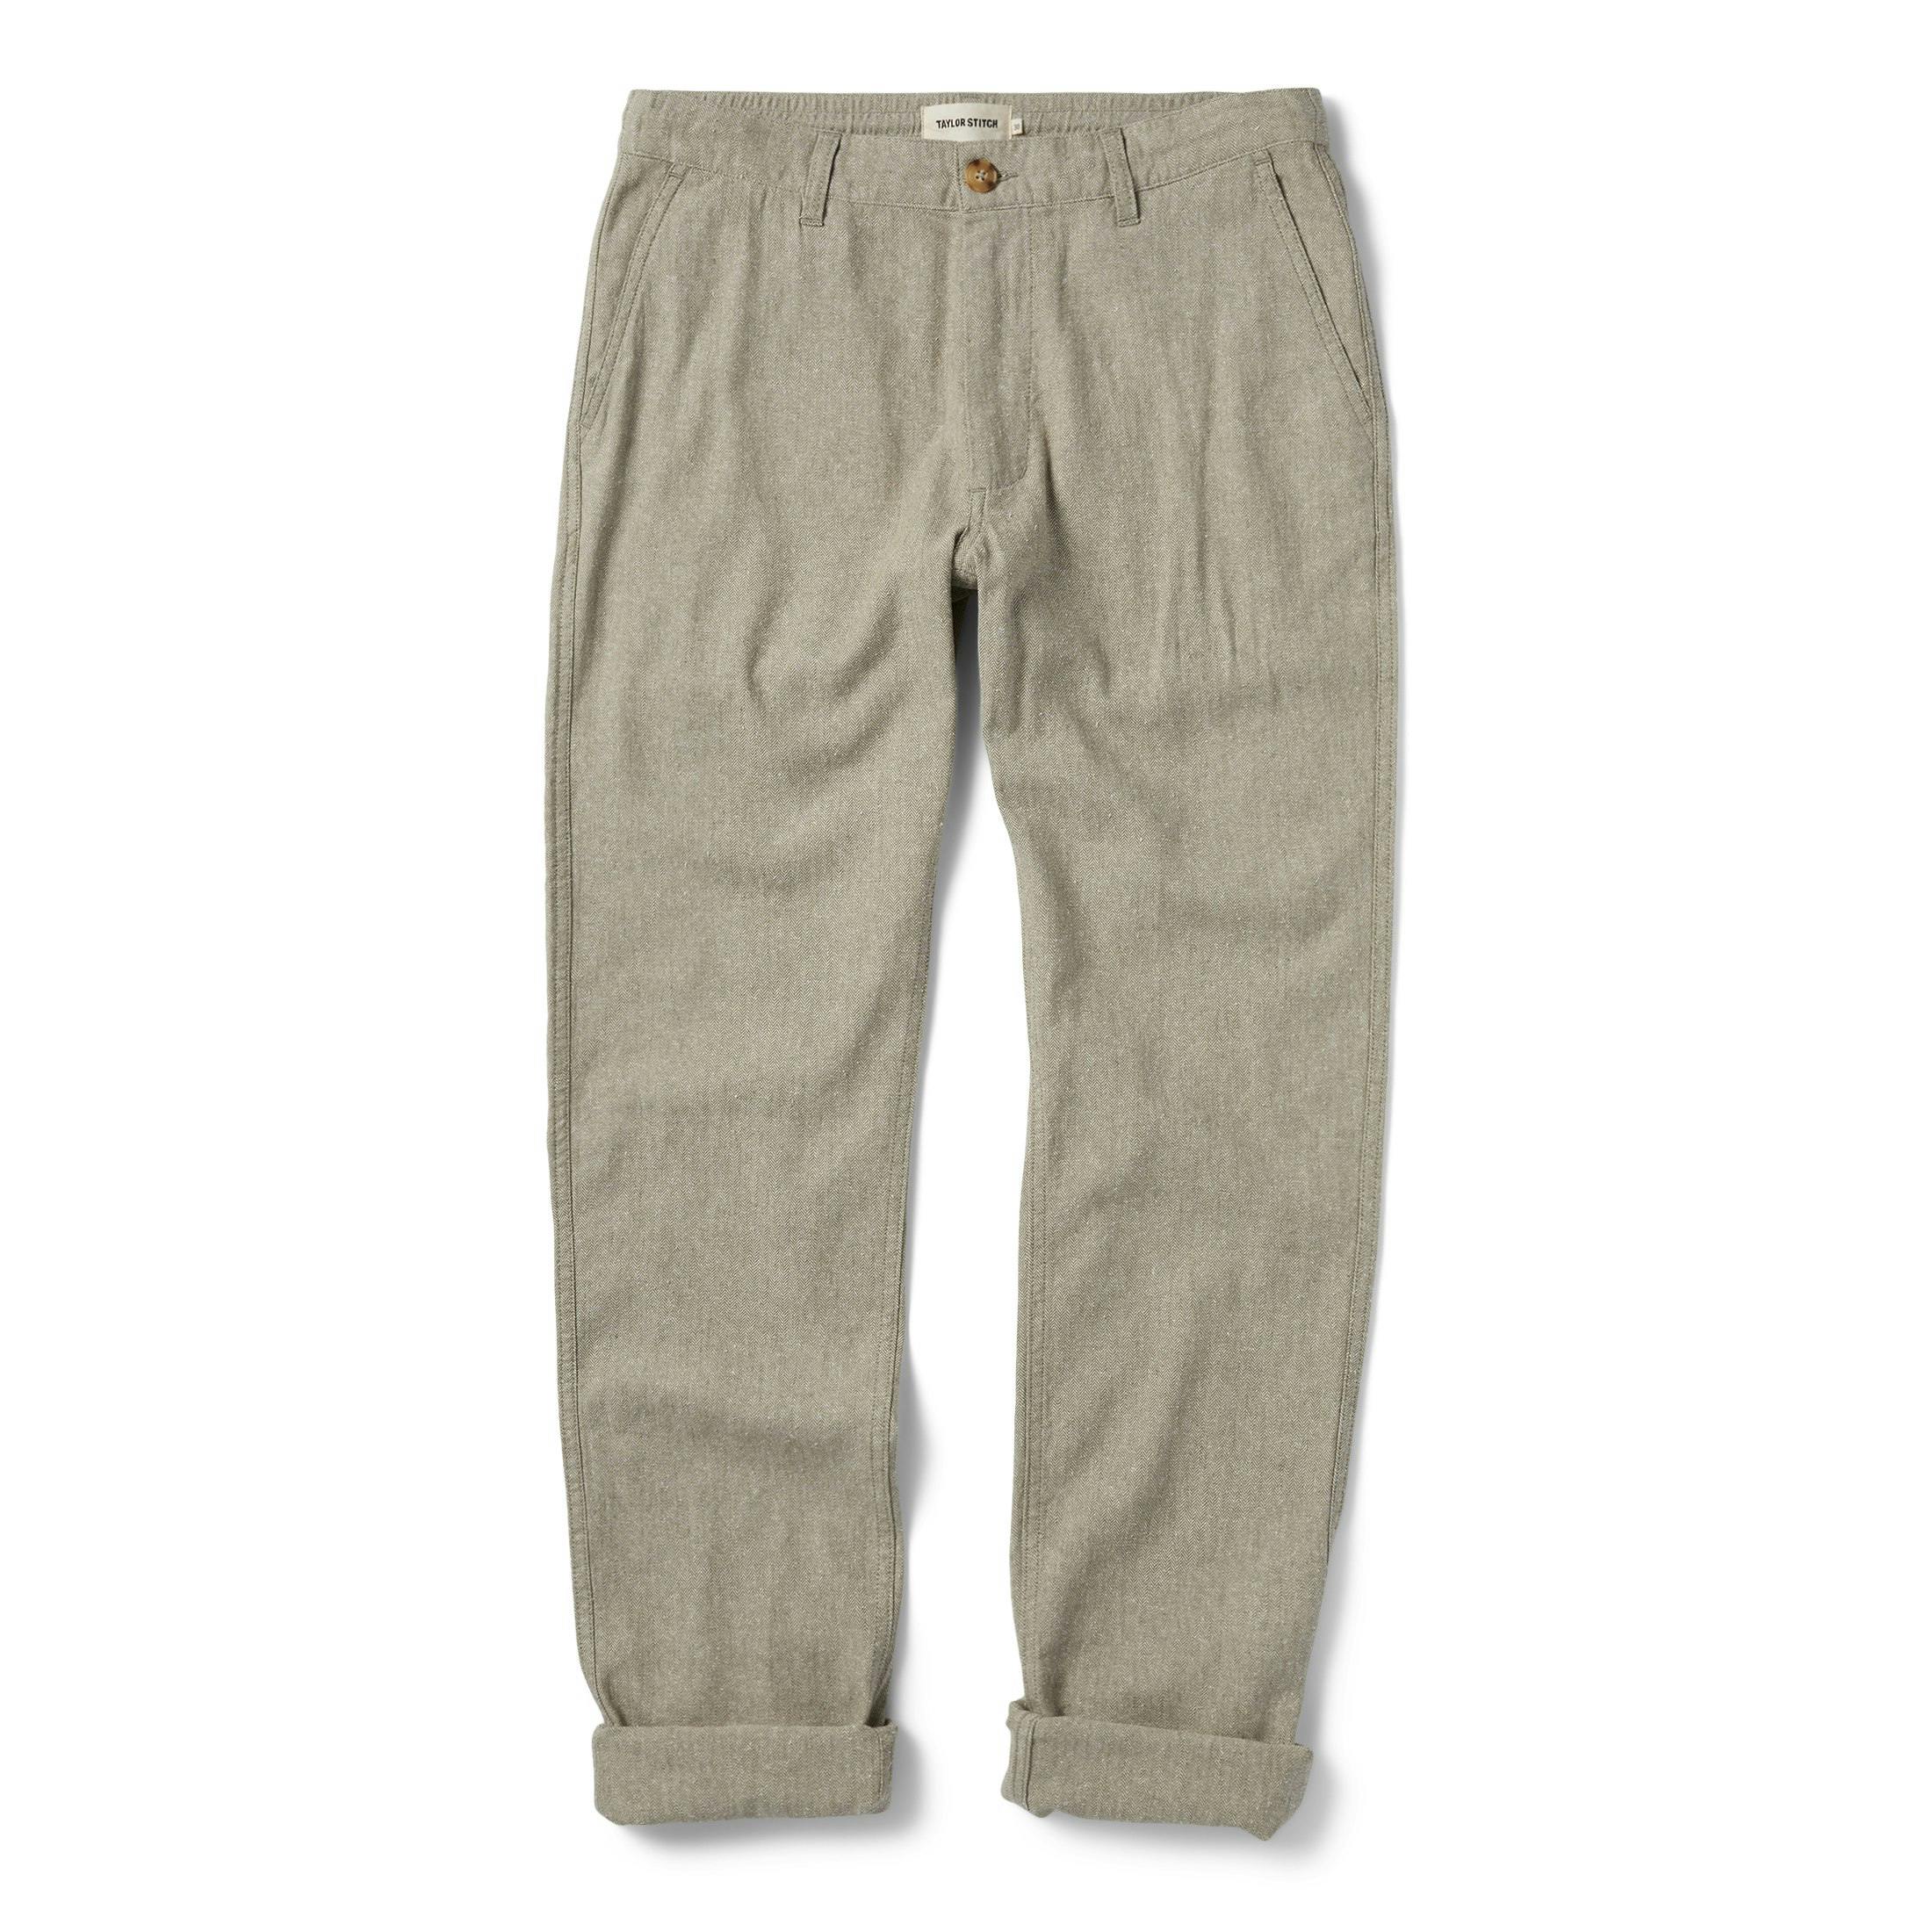 The Easy Pant